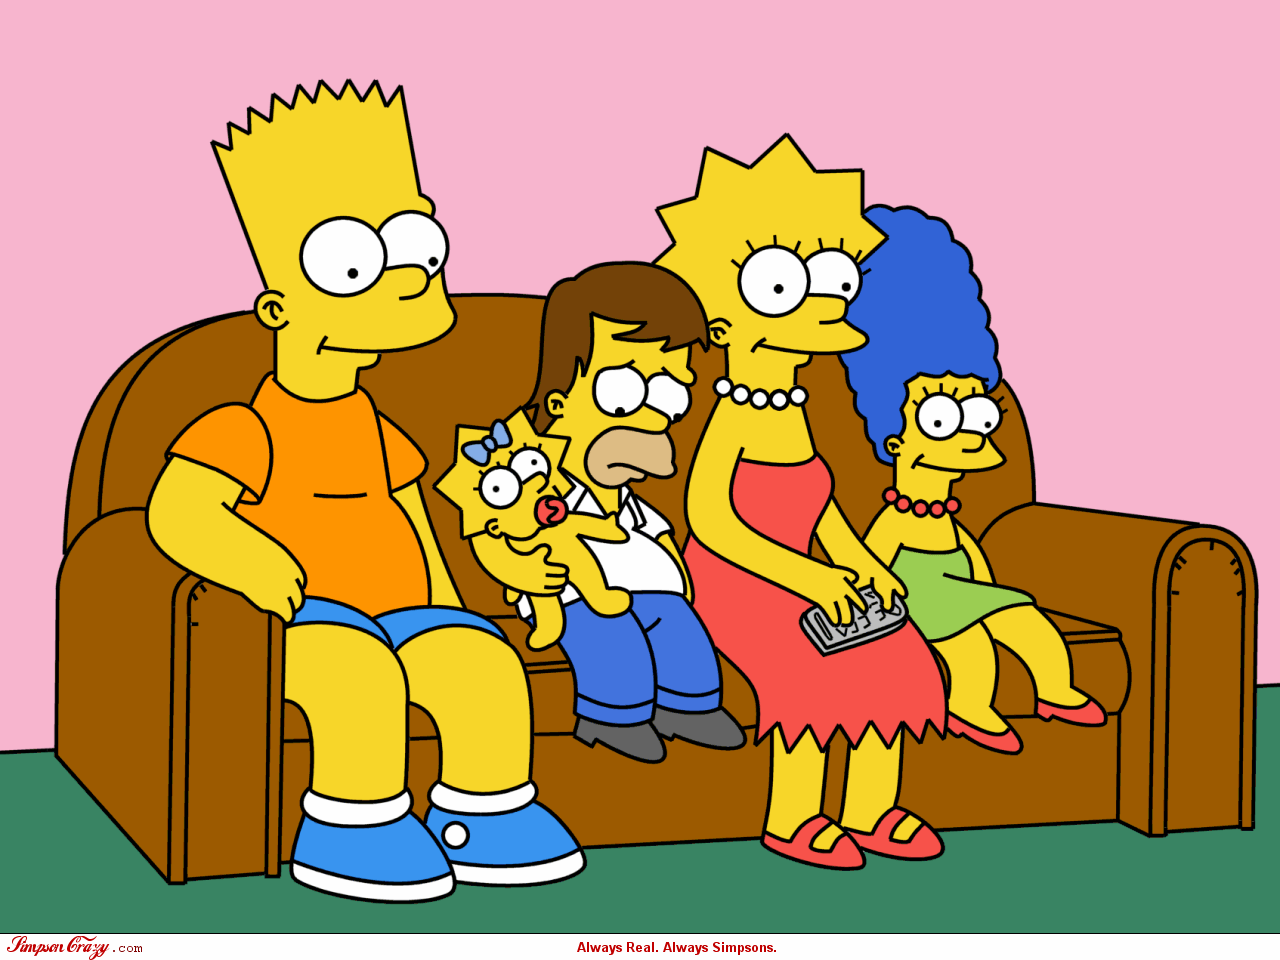 The Simpsons wallpapers Simpsons Crazy